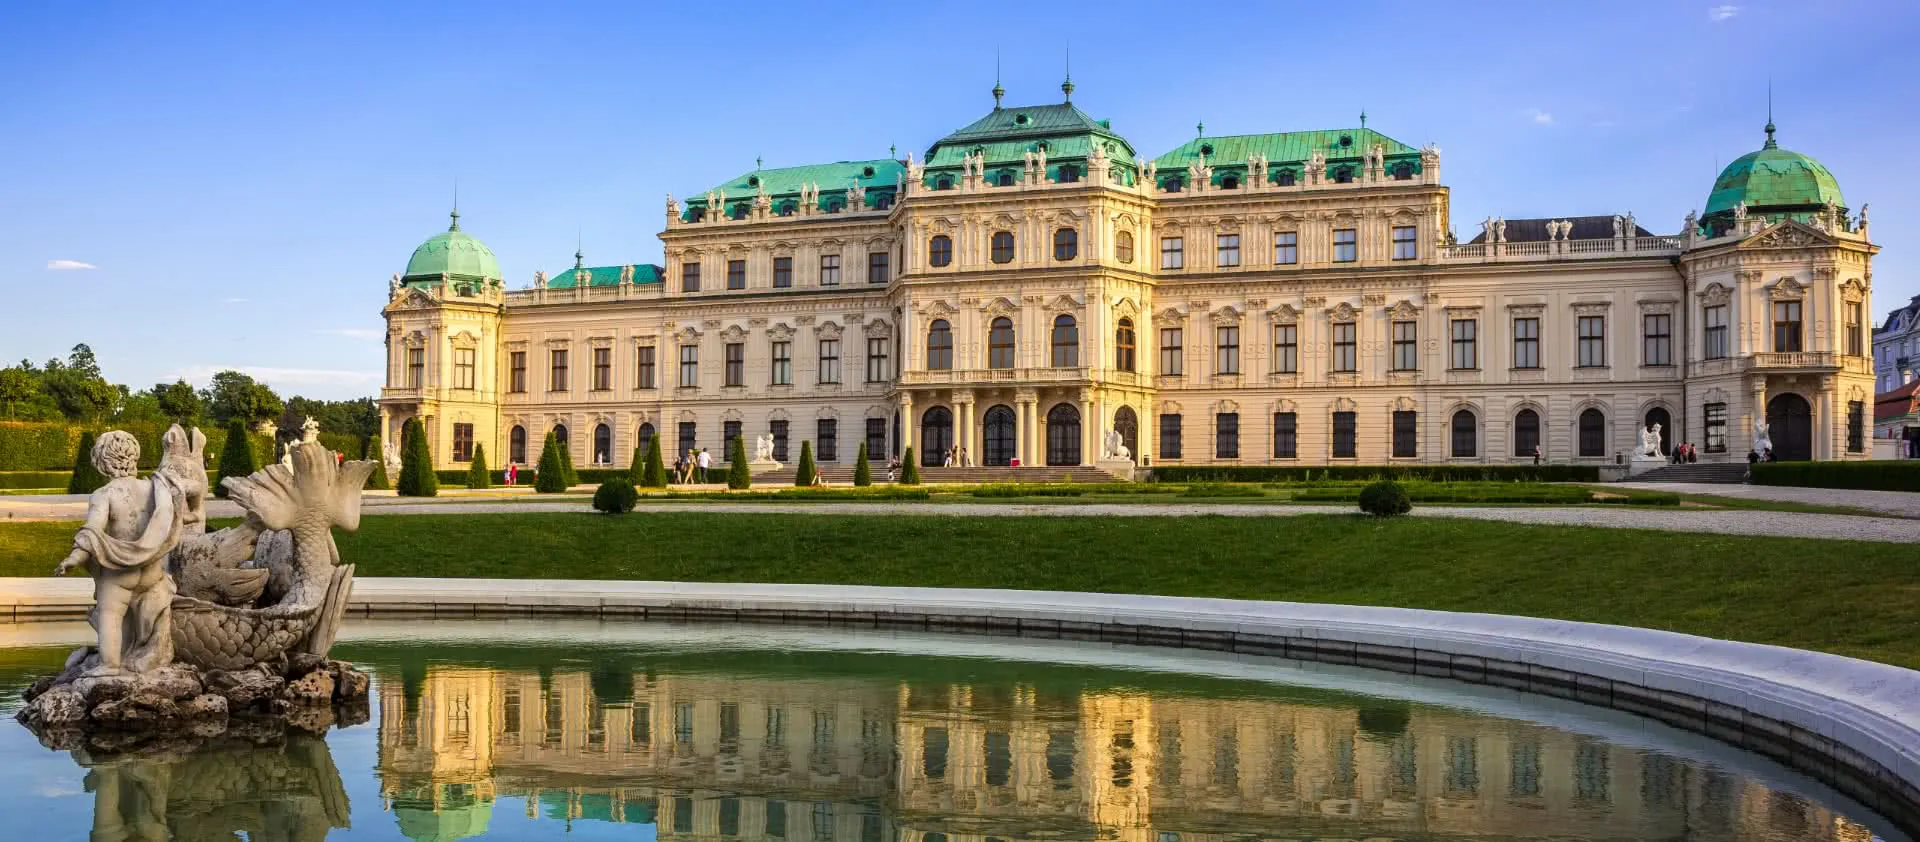 Vienna - the destination for group trips